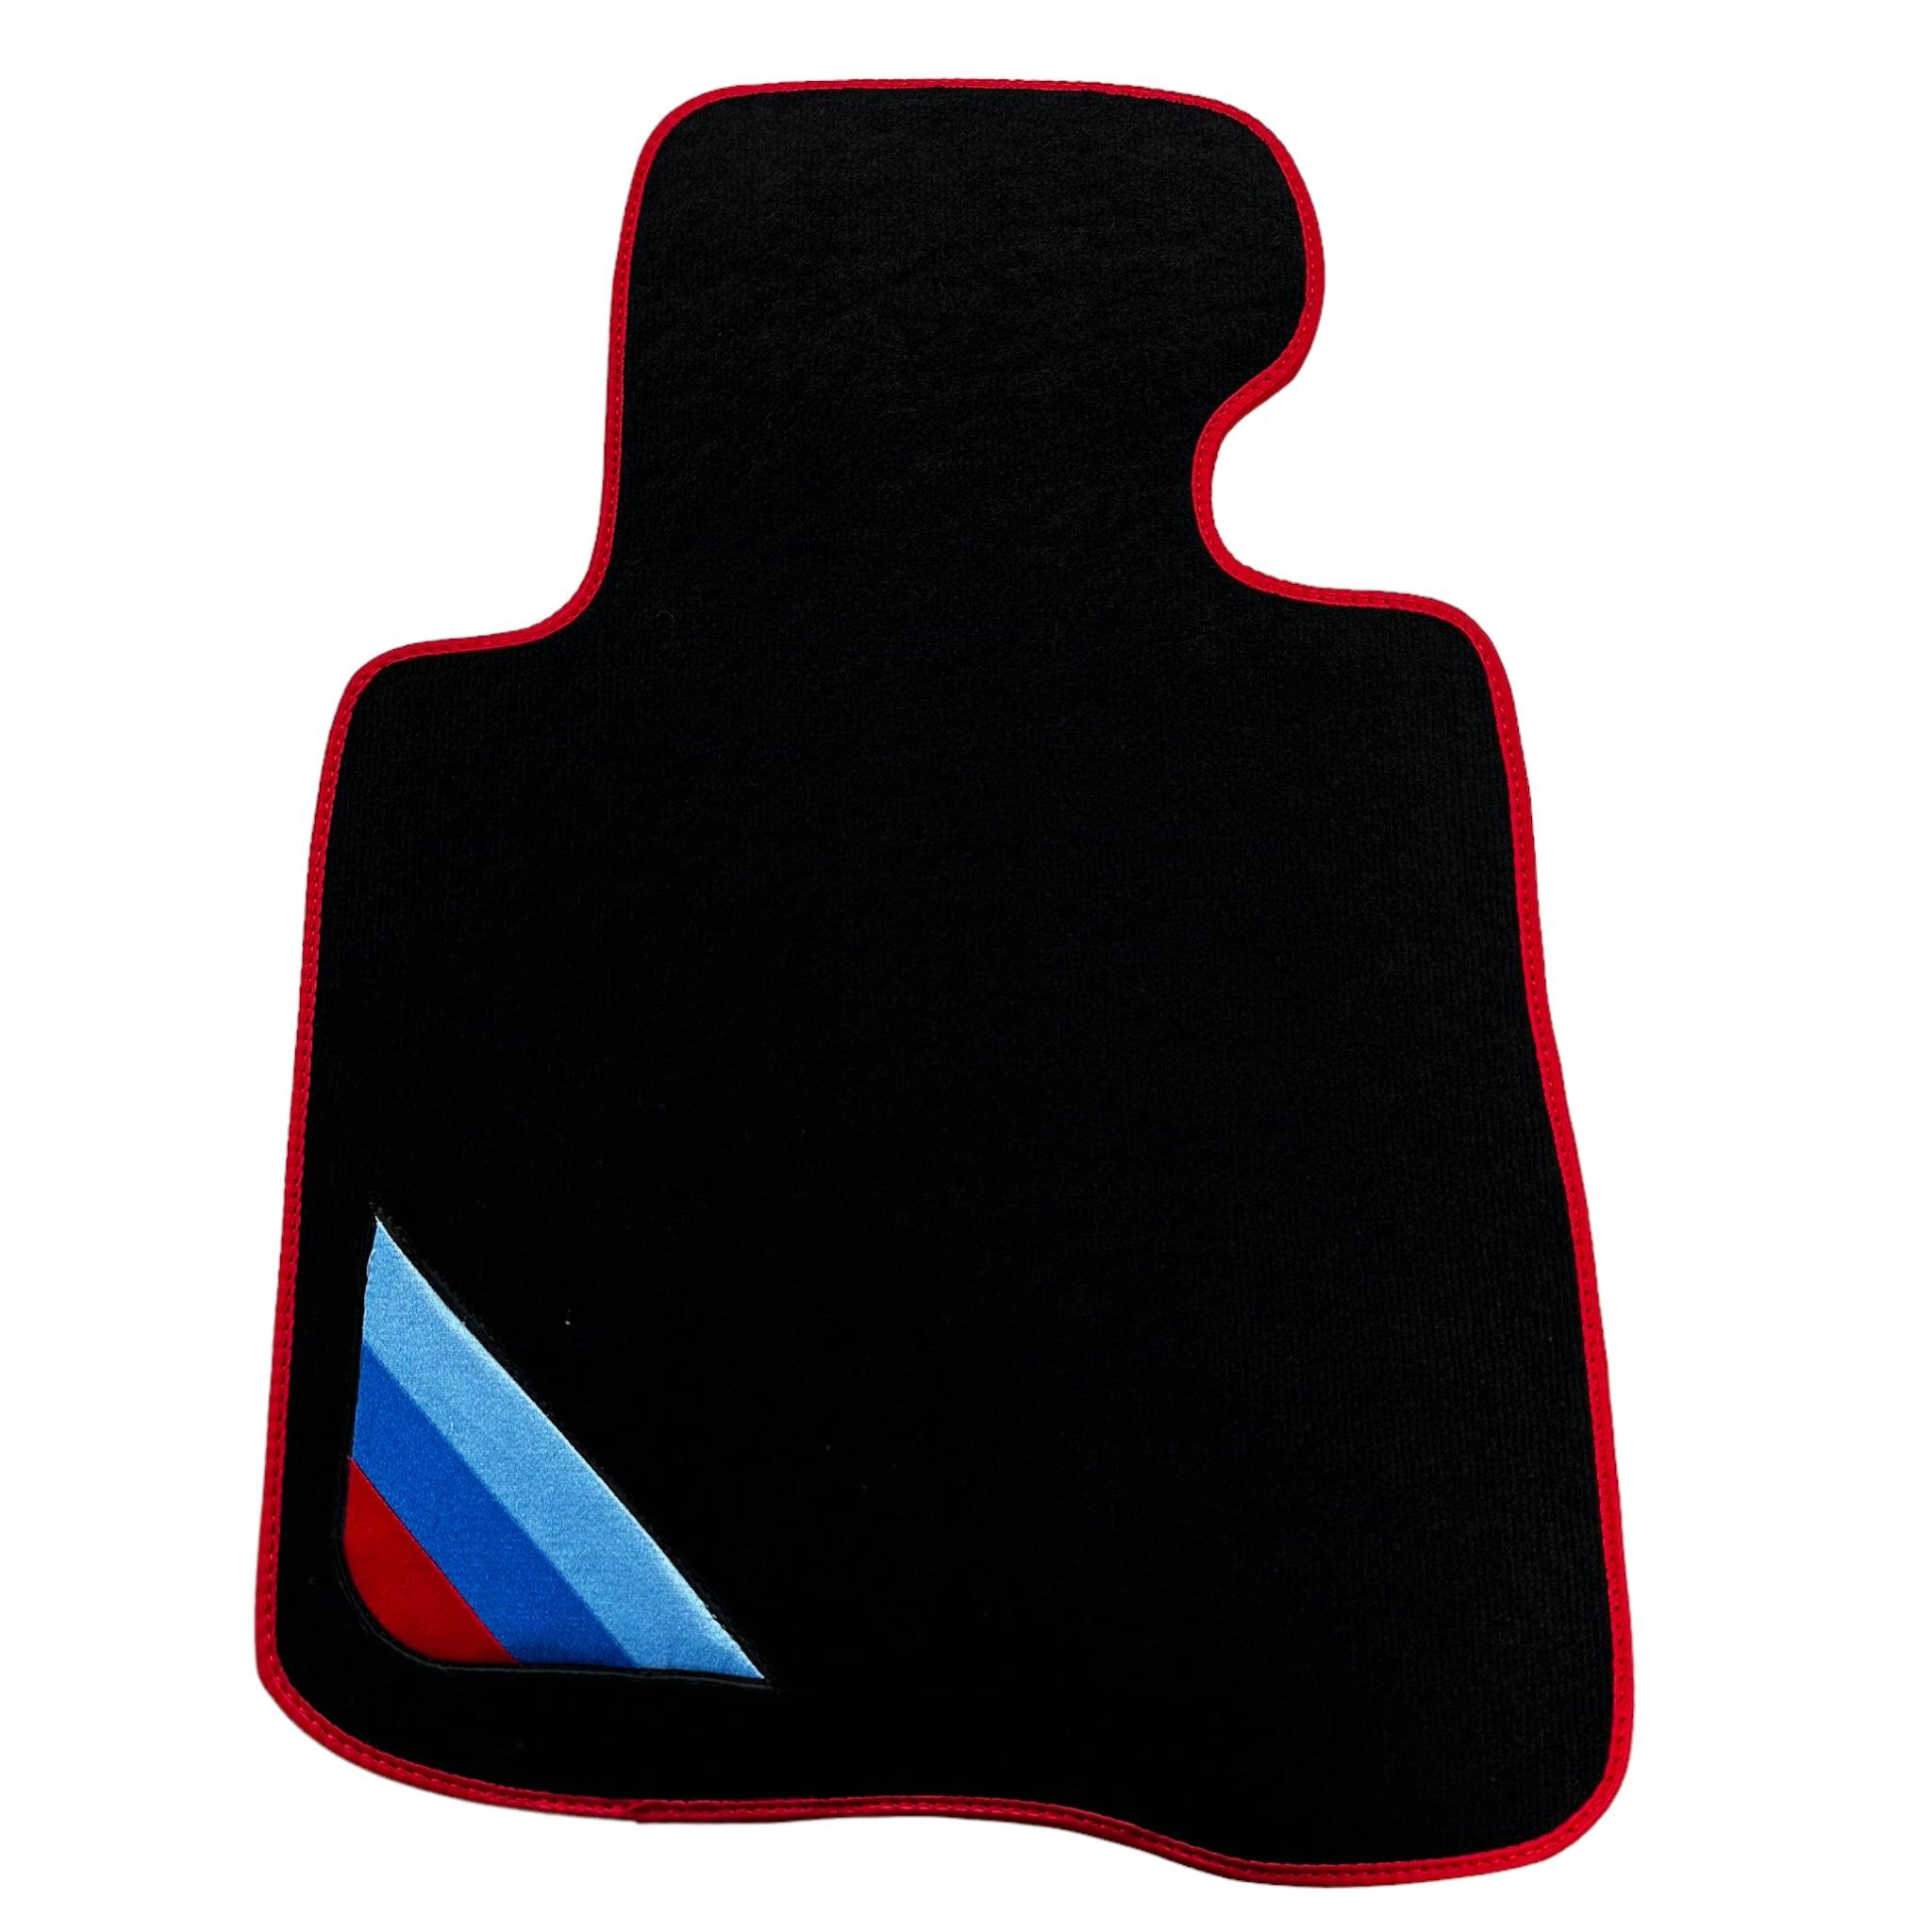 Black Floor Mats For BMW 4 Series F33 With Red Trim